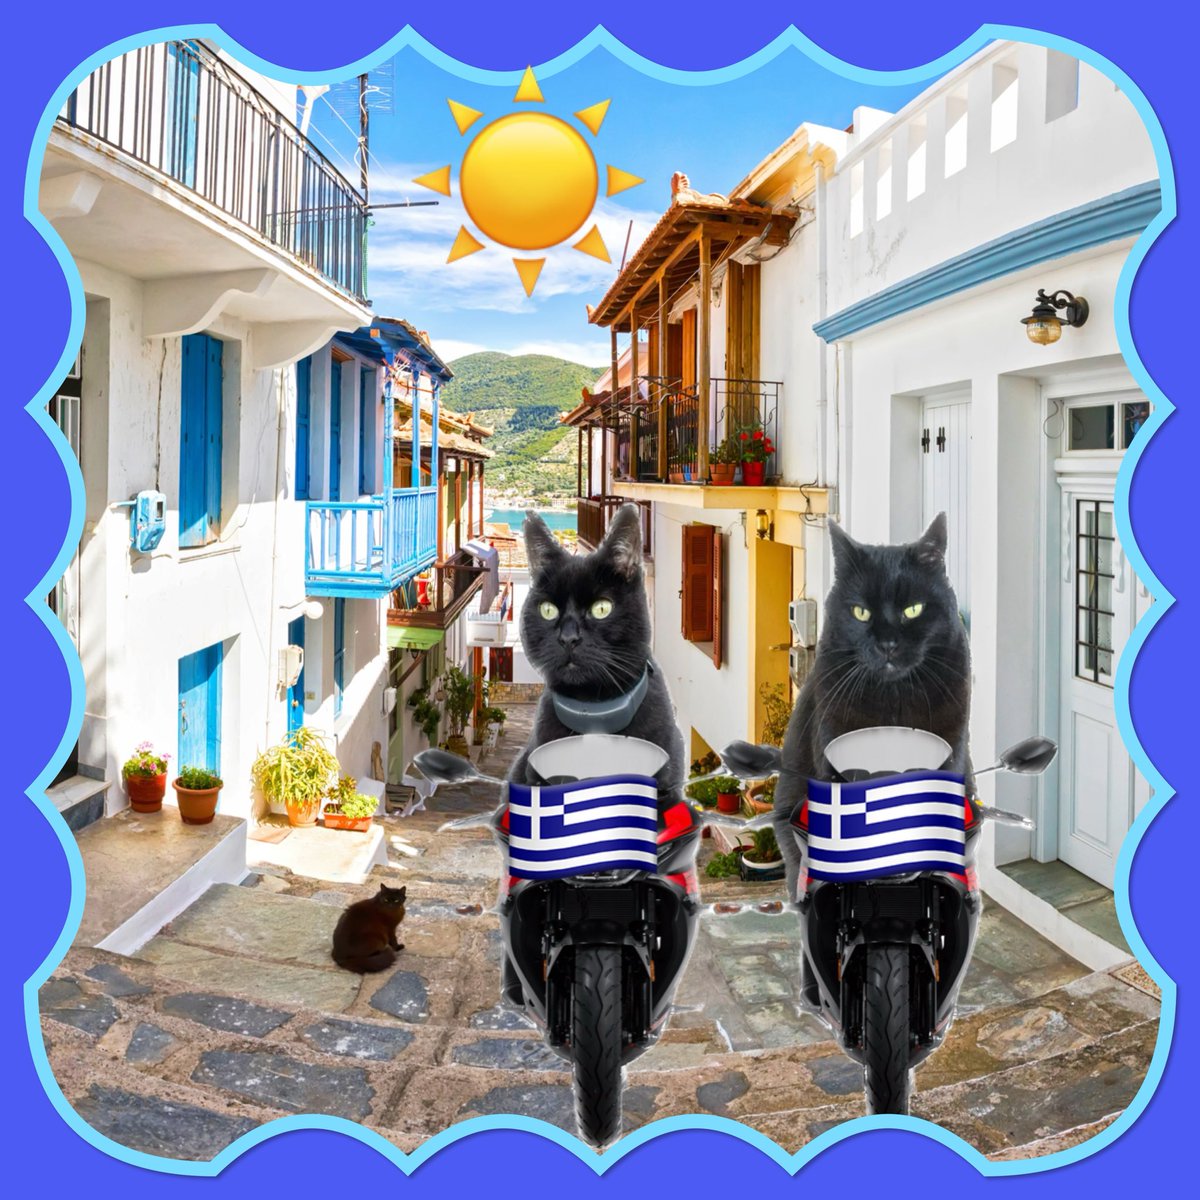 #Hedgewatch #theruffriderz #TwoGreekBrothers #PostcardFromKos @MunchPudding 💙🇬🇷💙Munch, today is the day! We are off to Greece again for a secret mission! Let’s go Bro! 💙🇬🇷💙